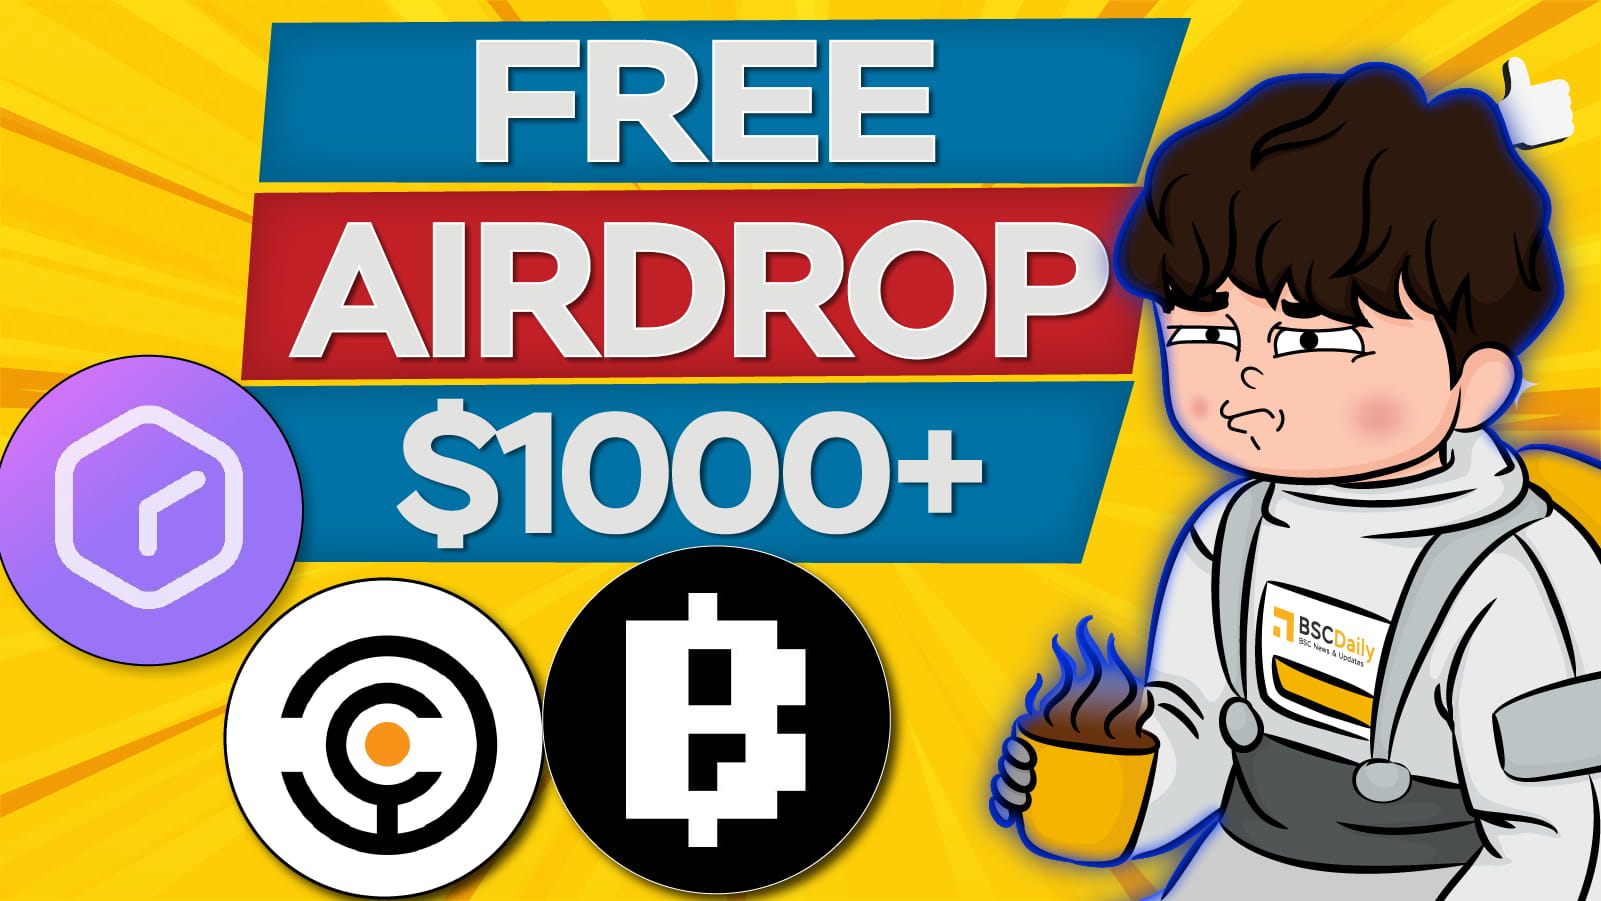 FREE AIRDROP $1000+ POTENTIAL